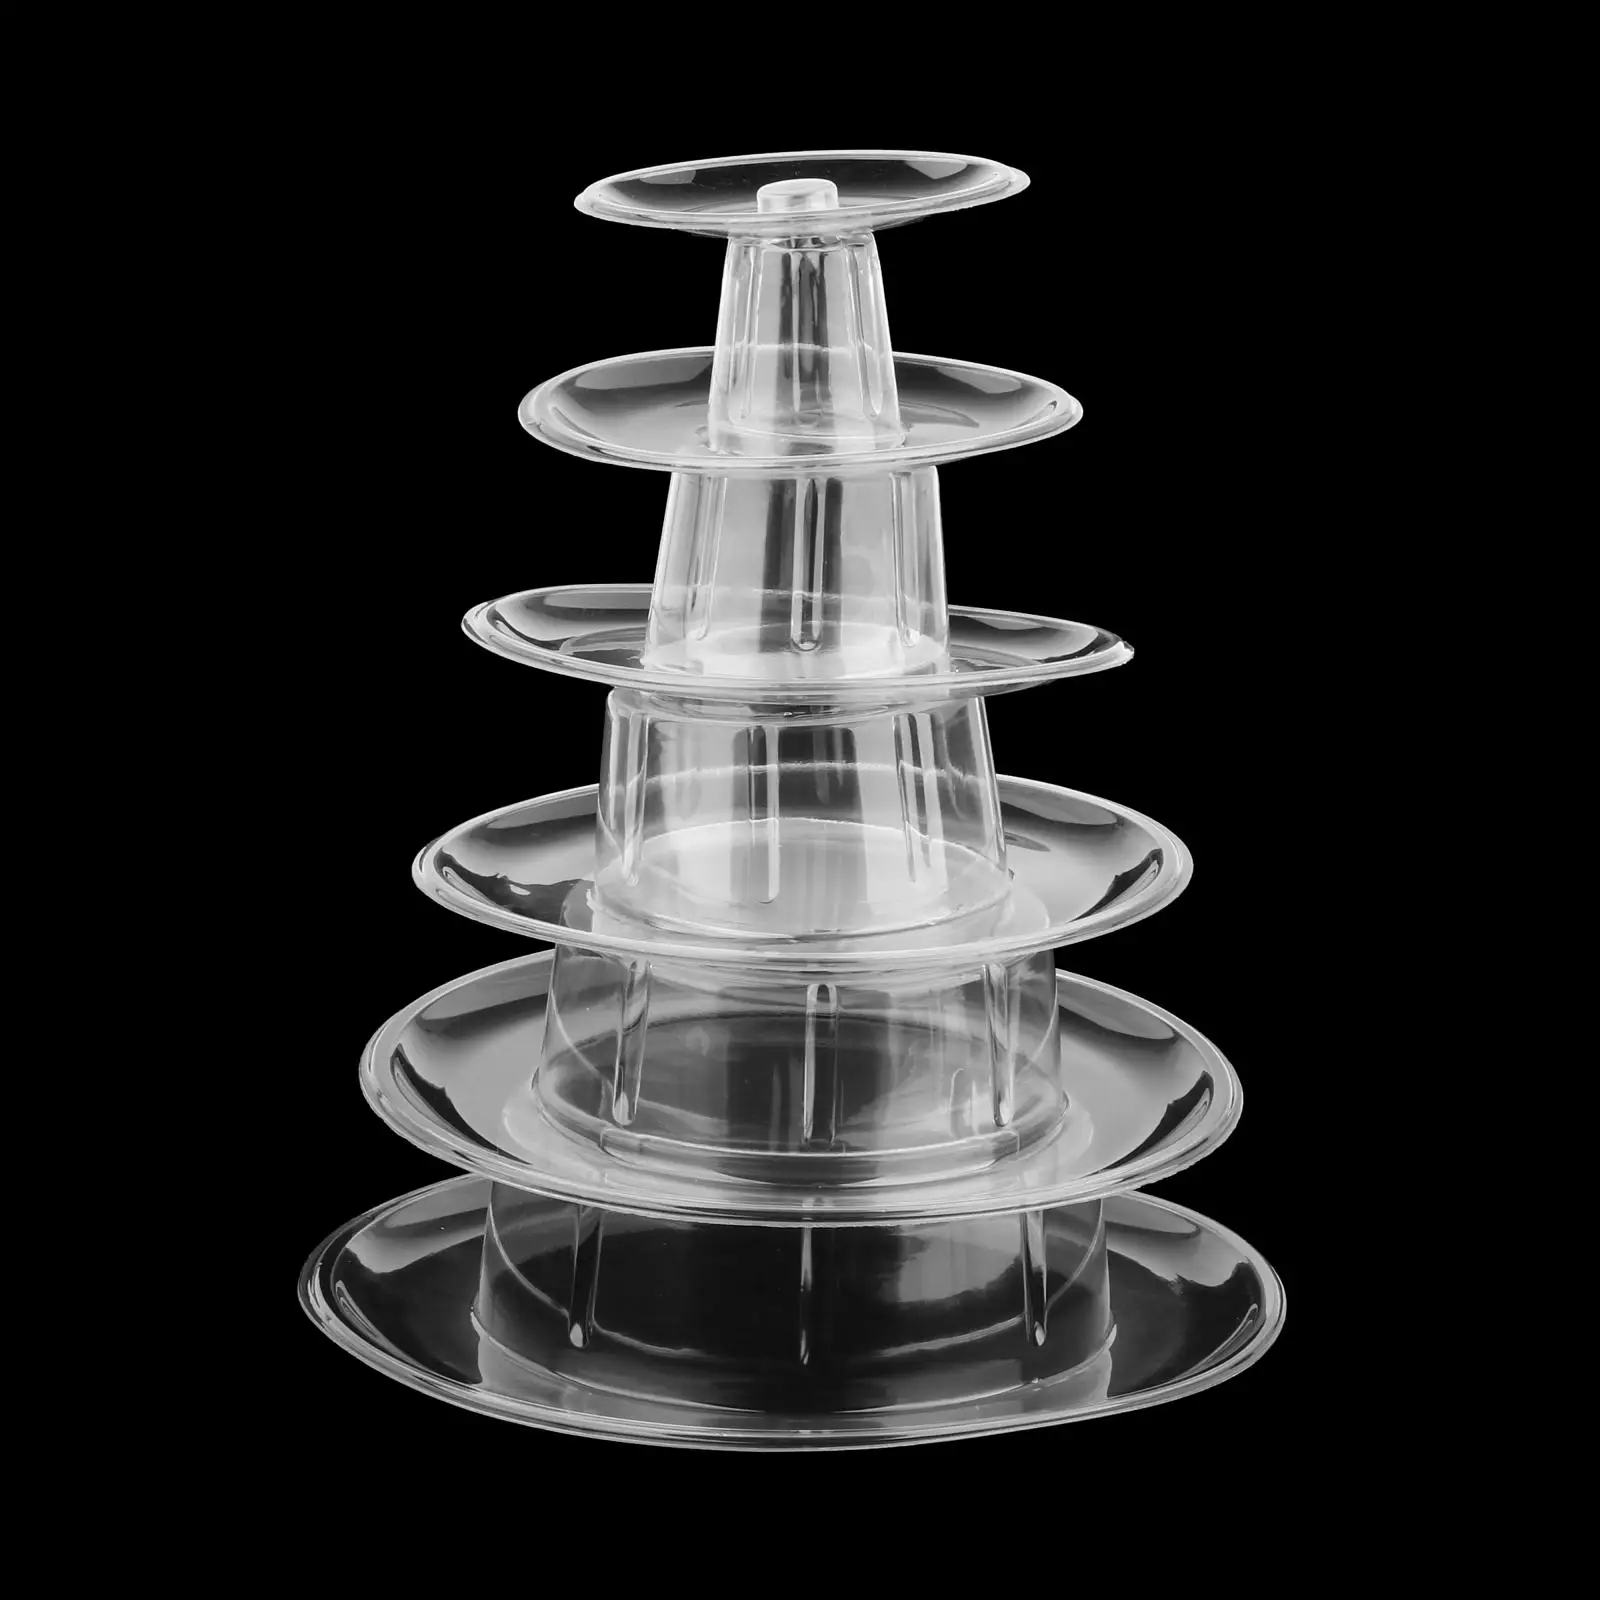 6 Tiers Macaron Tower Stand Cake Display Rack Cupcake/Food/ Fruit Stand Display for Wedding Party Event Use